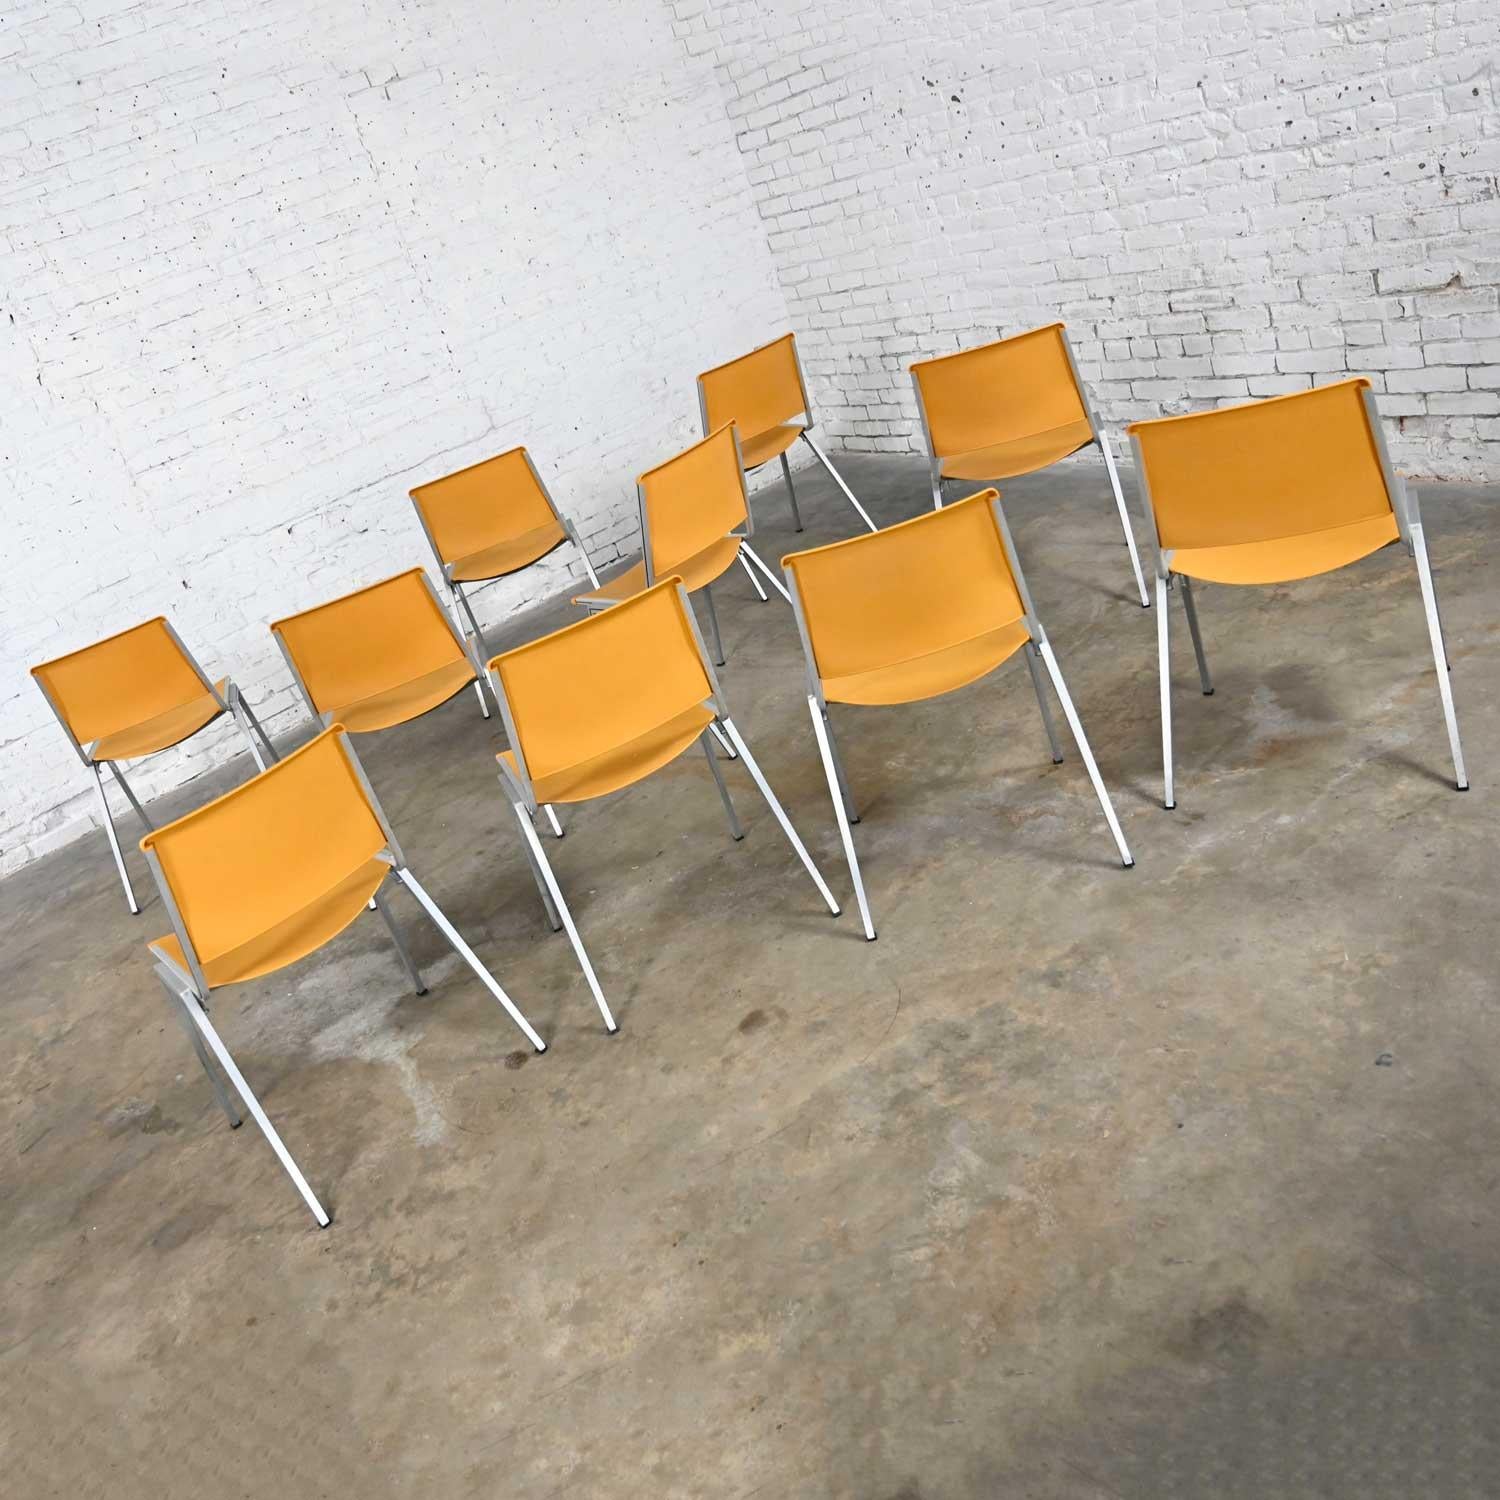 Vintage Aluminum Steelcase Stacking Chairs Model 1278 Yellow Gold Plastic Set 10 1